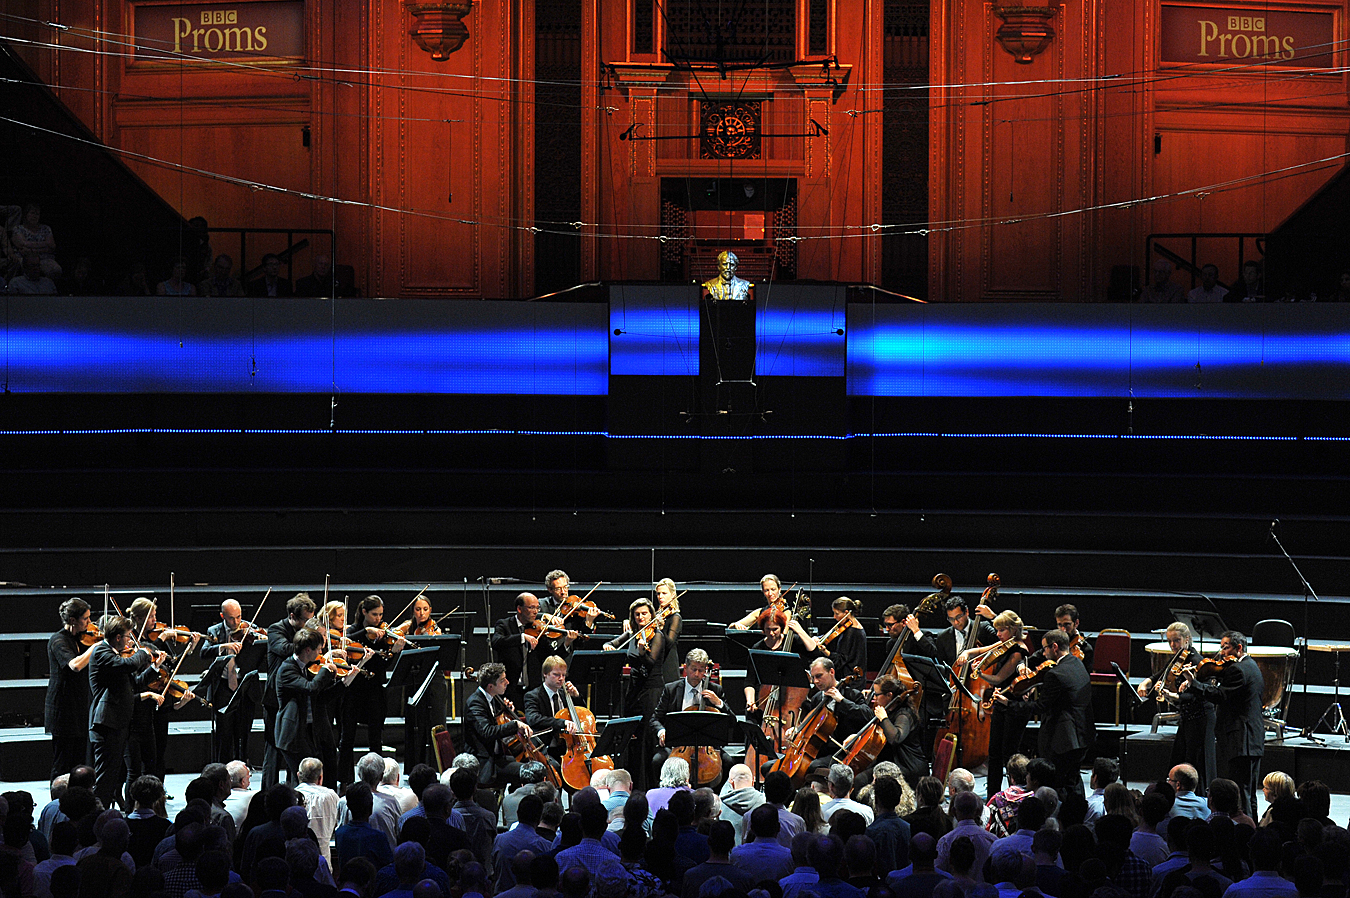 Mahler Chamber Orchestra at the Proms